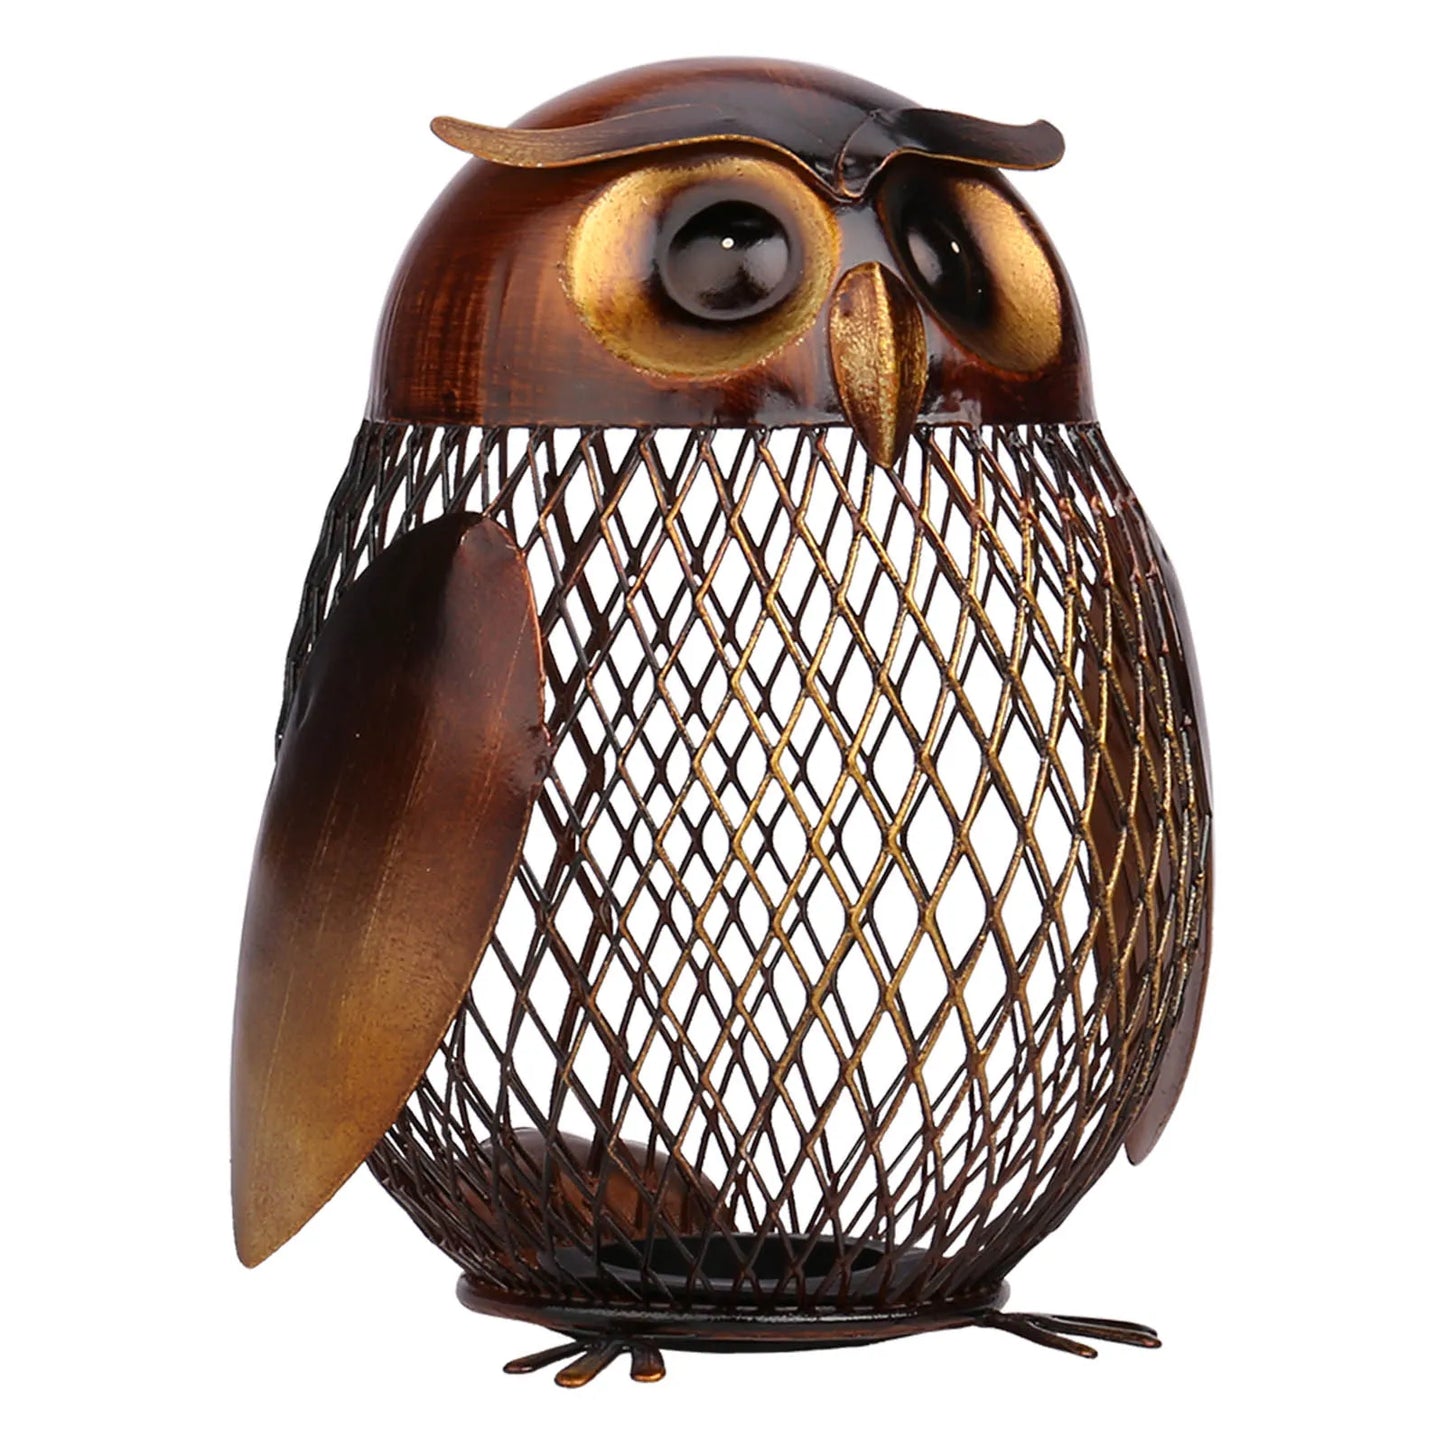 TOOARTS Owl Shaped Metal Coin Money Saving Box Money Boxes Home Decor Furnishing Articles Crafting Christmas Gift for Kids